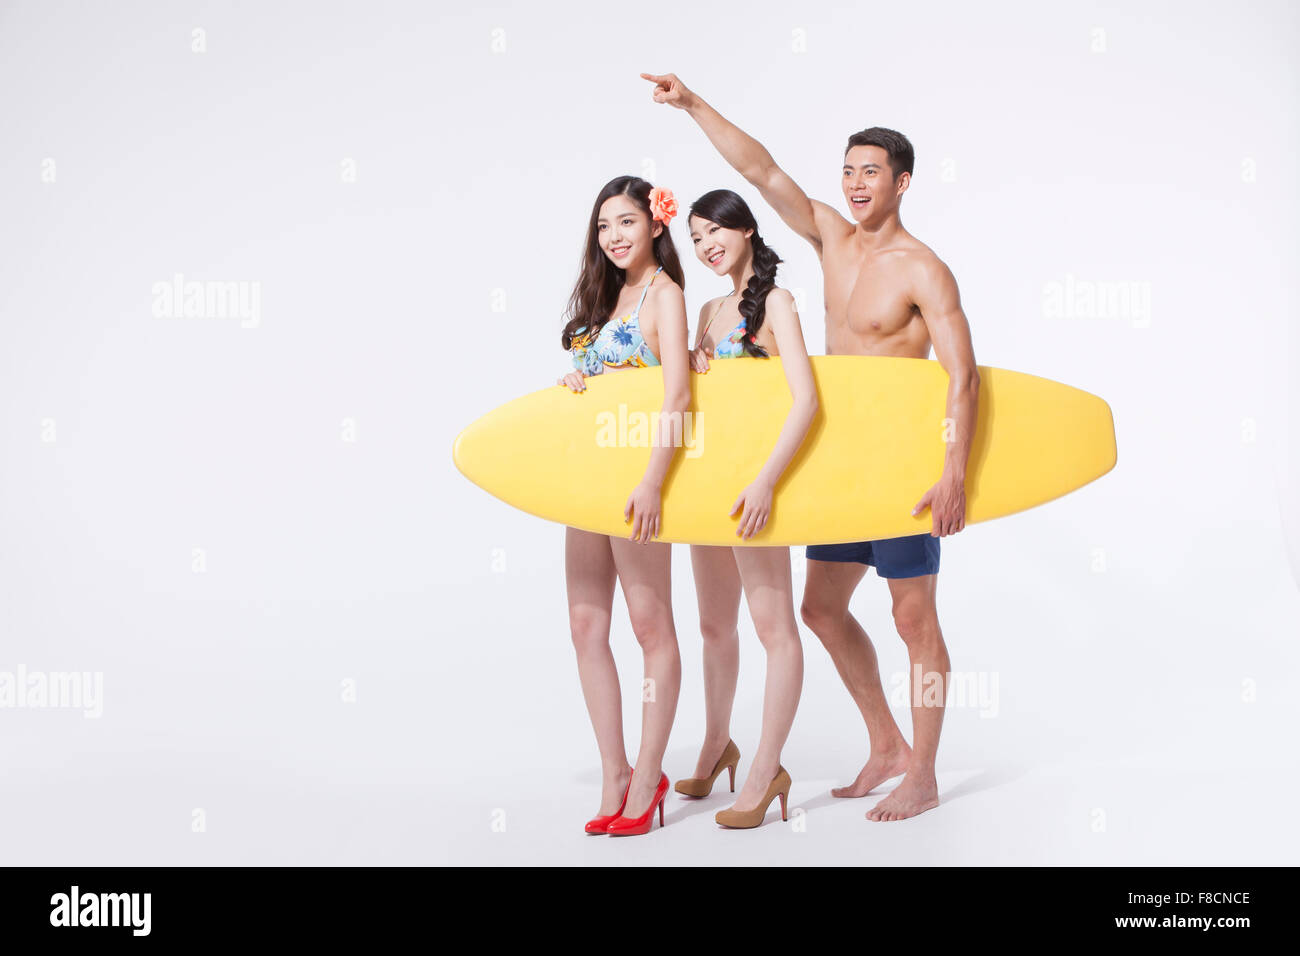 Two women in bikini and heels and a man in swimming pants holding a surfing board together and man pointing with his finger Stock Photo